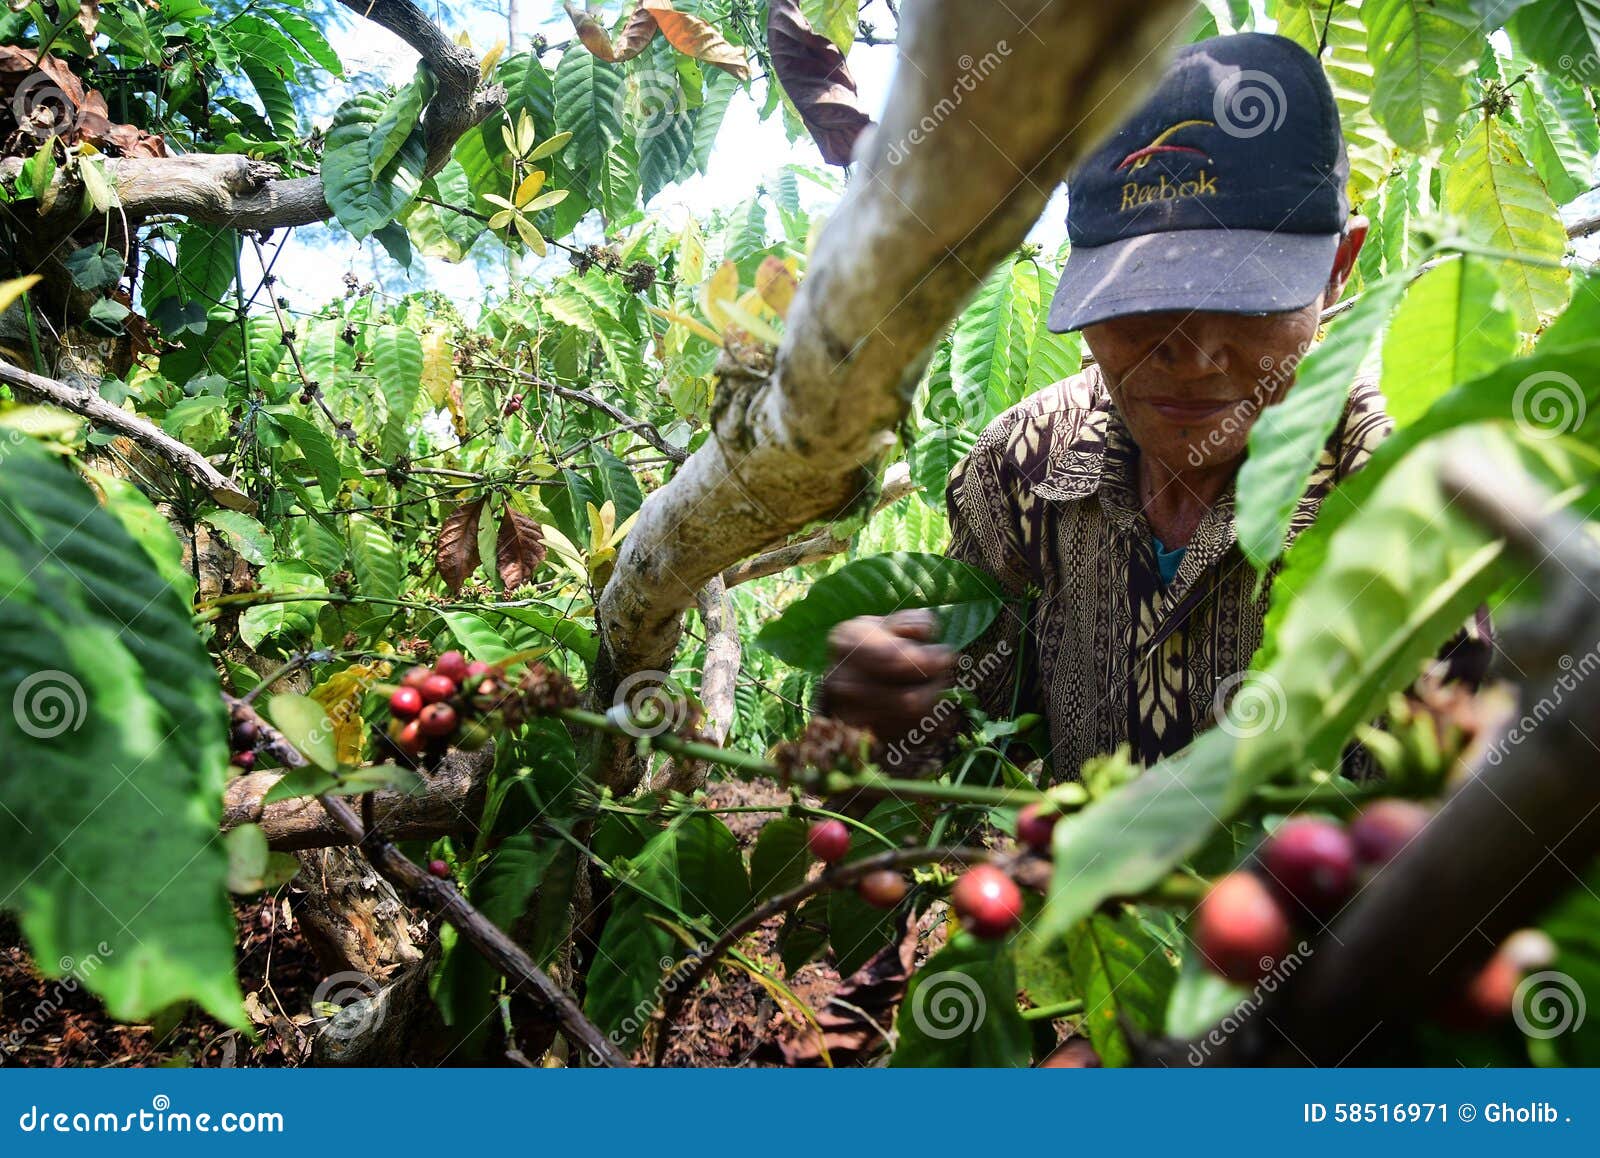 COFFEE CULTIVATION IN GUATEMALA LABORERS PICKING HARVESTING COFFEE PLANTATION 